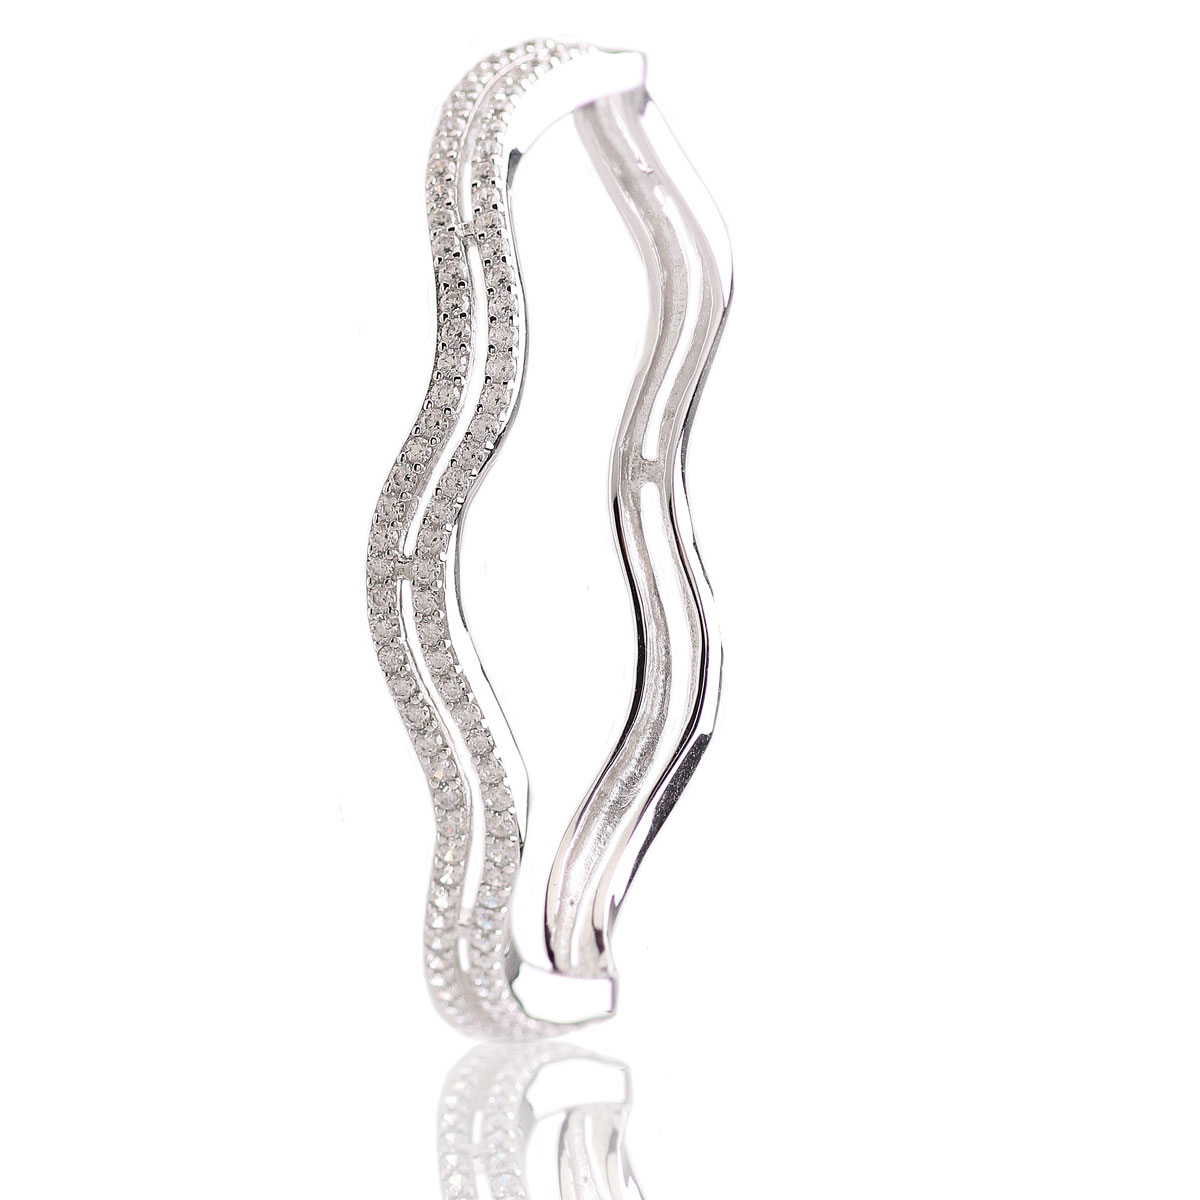 Cashs Ireland, Crystal Pave Sterling Silver Double Wave Hinged Bracelet